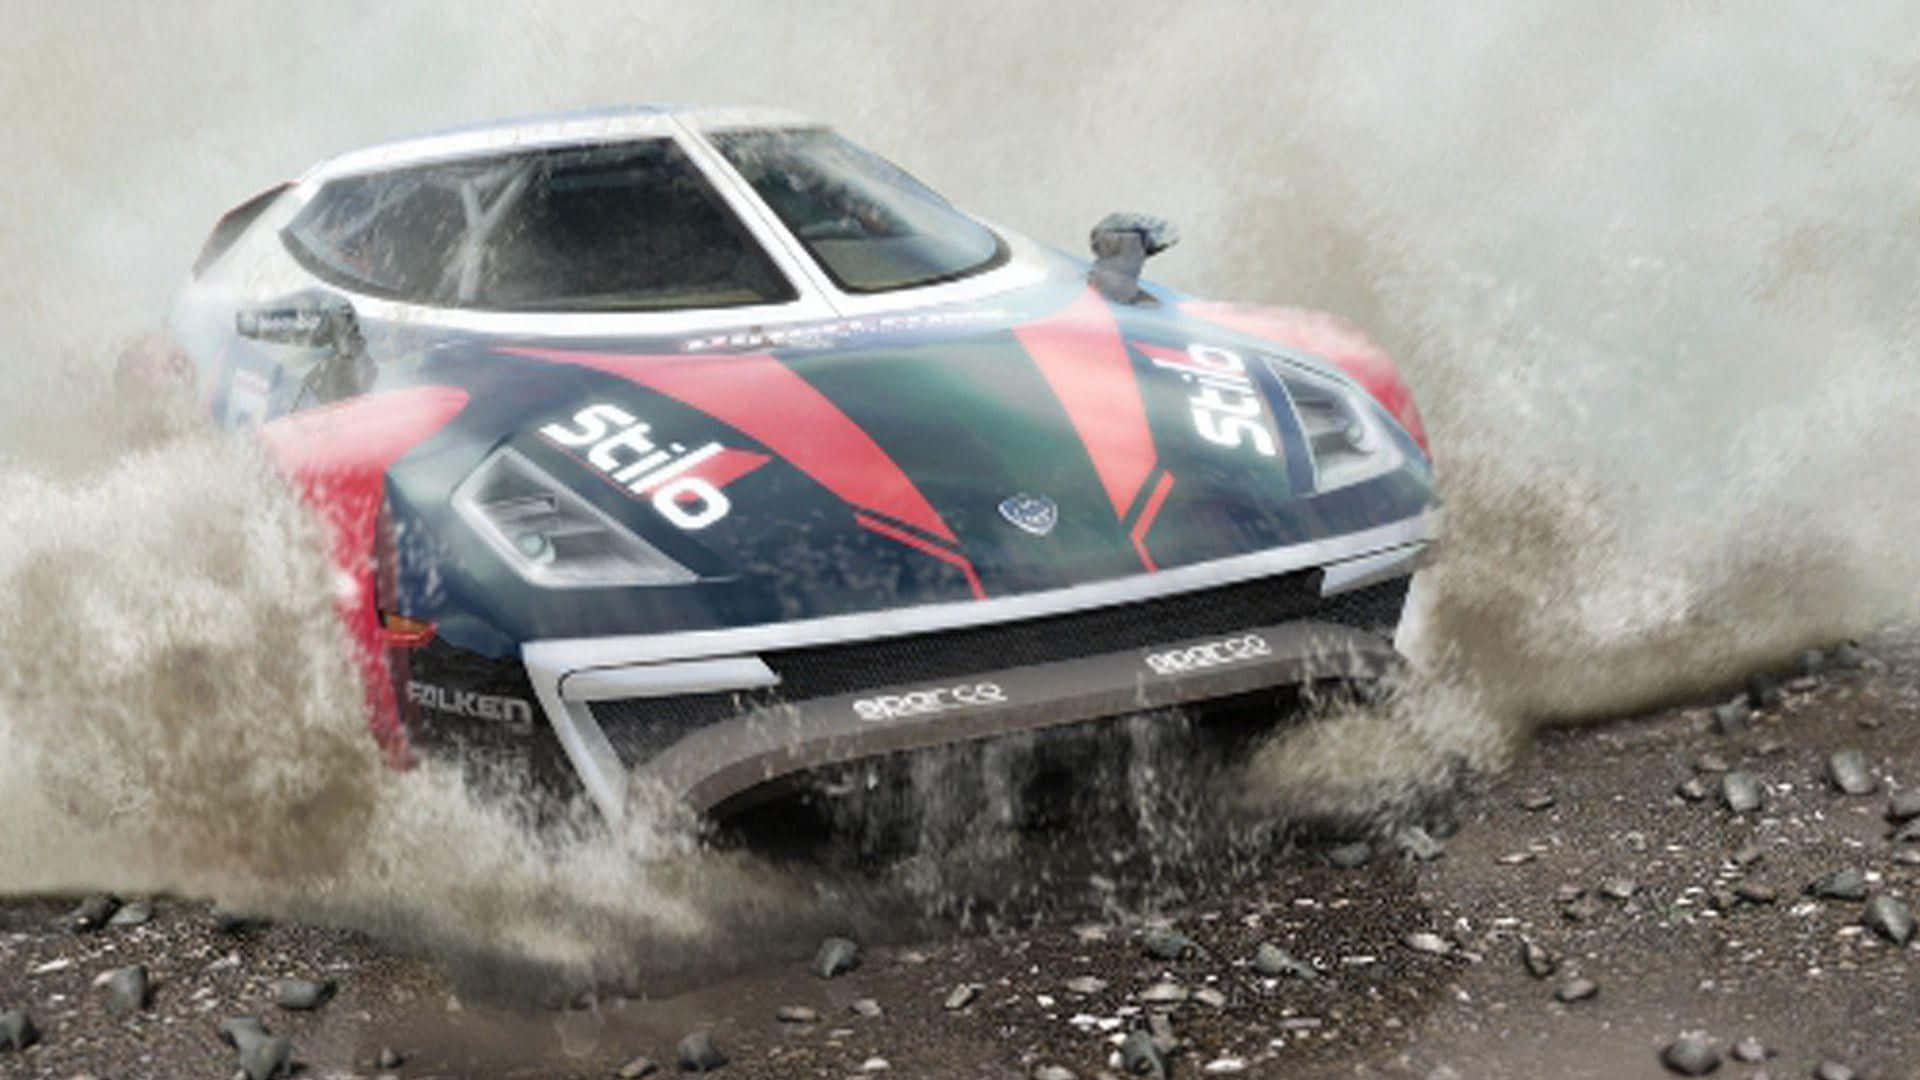 Enjoy the adrenaline-rush with Dirt 3 in high-quality 1080p